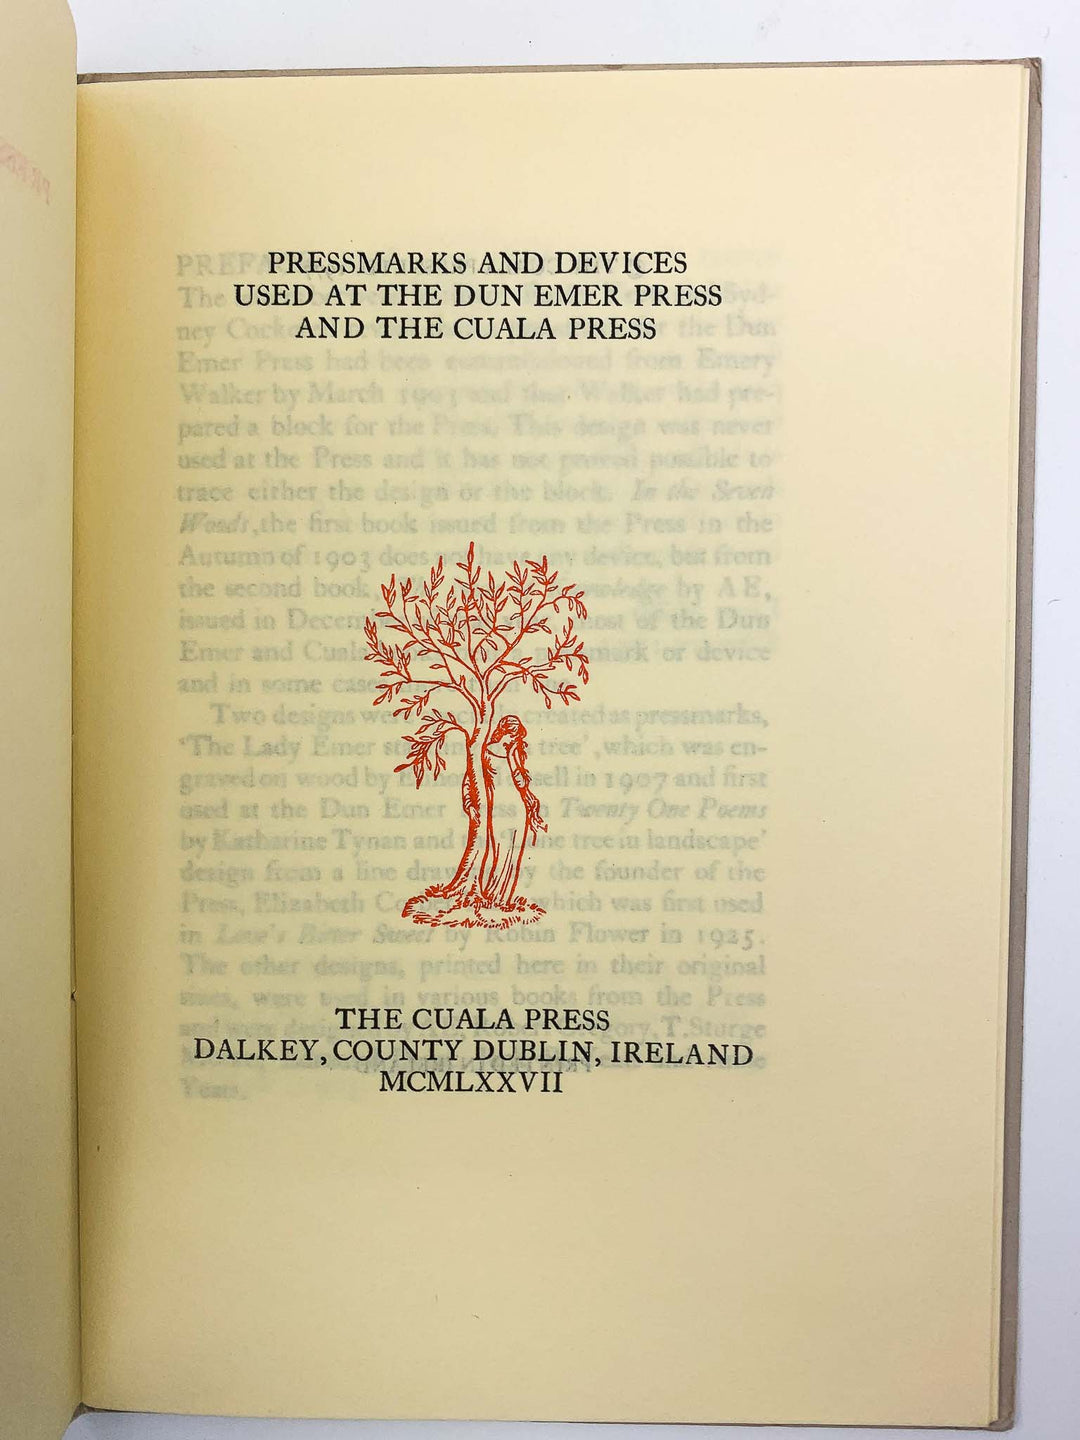 Pressmarks and Devices Used at The Dun Emer Press and The Cuala Press | book detail 5